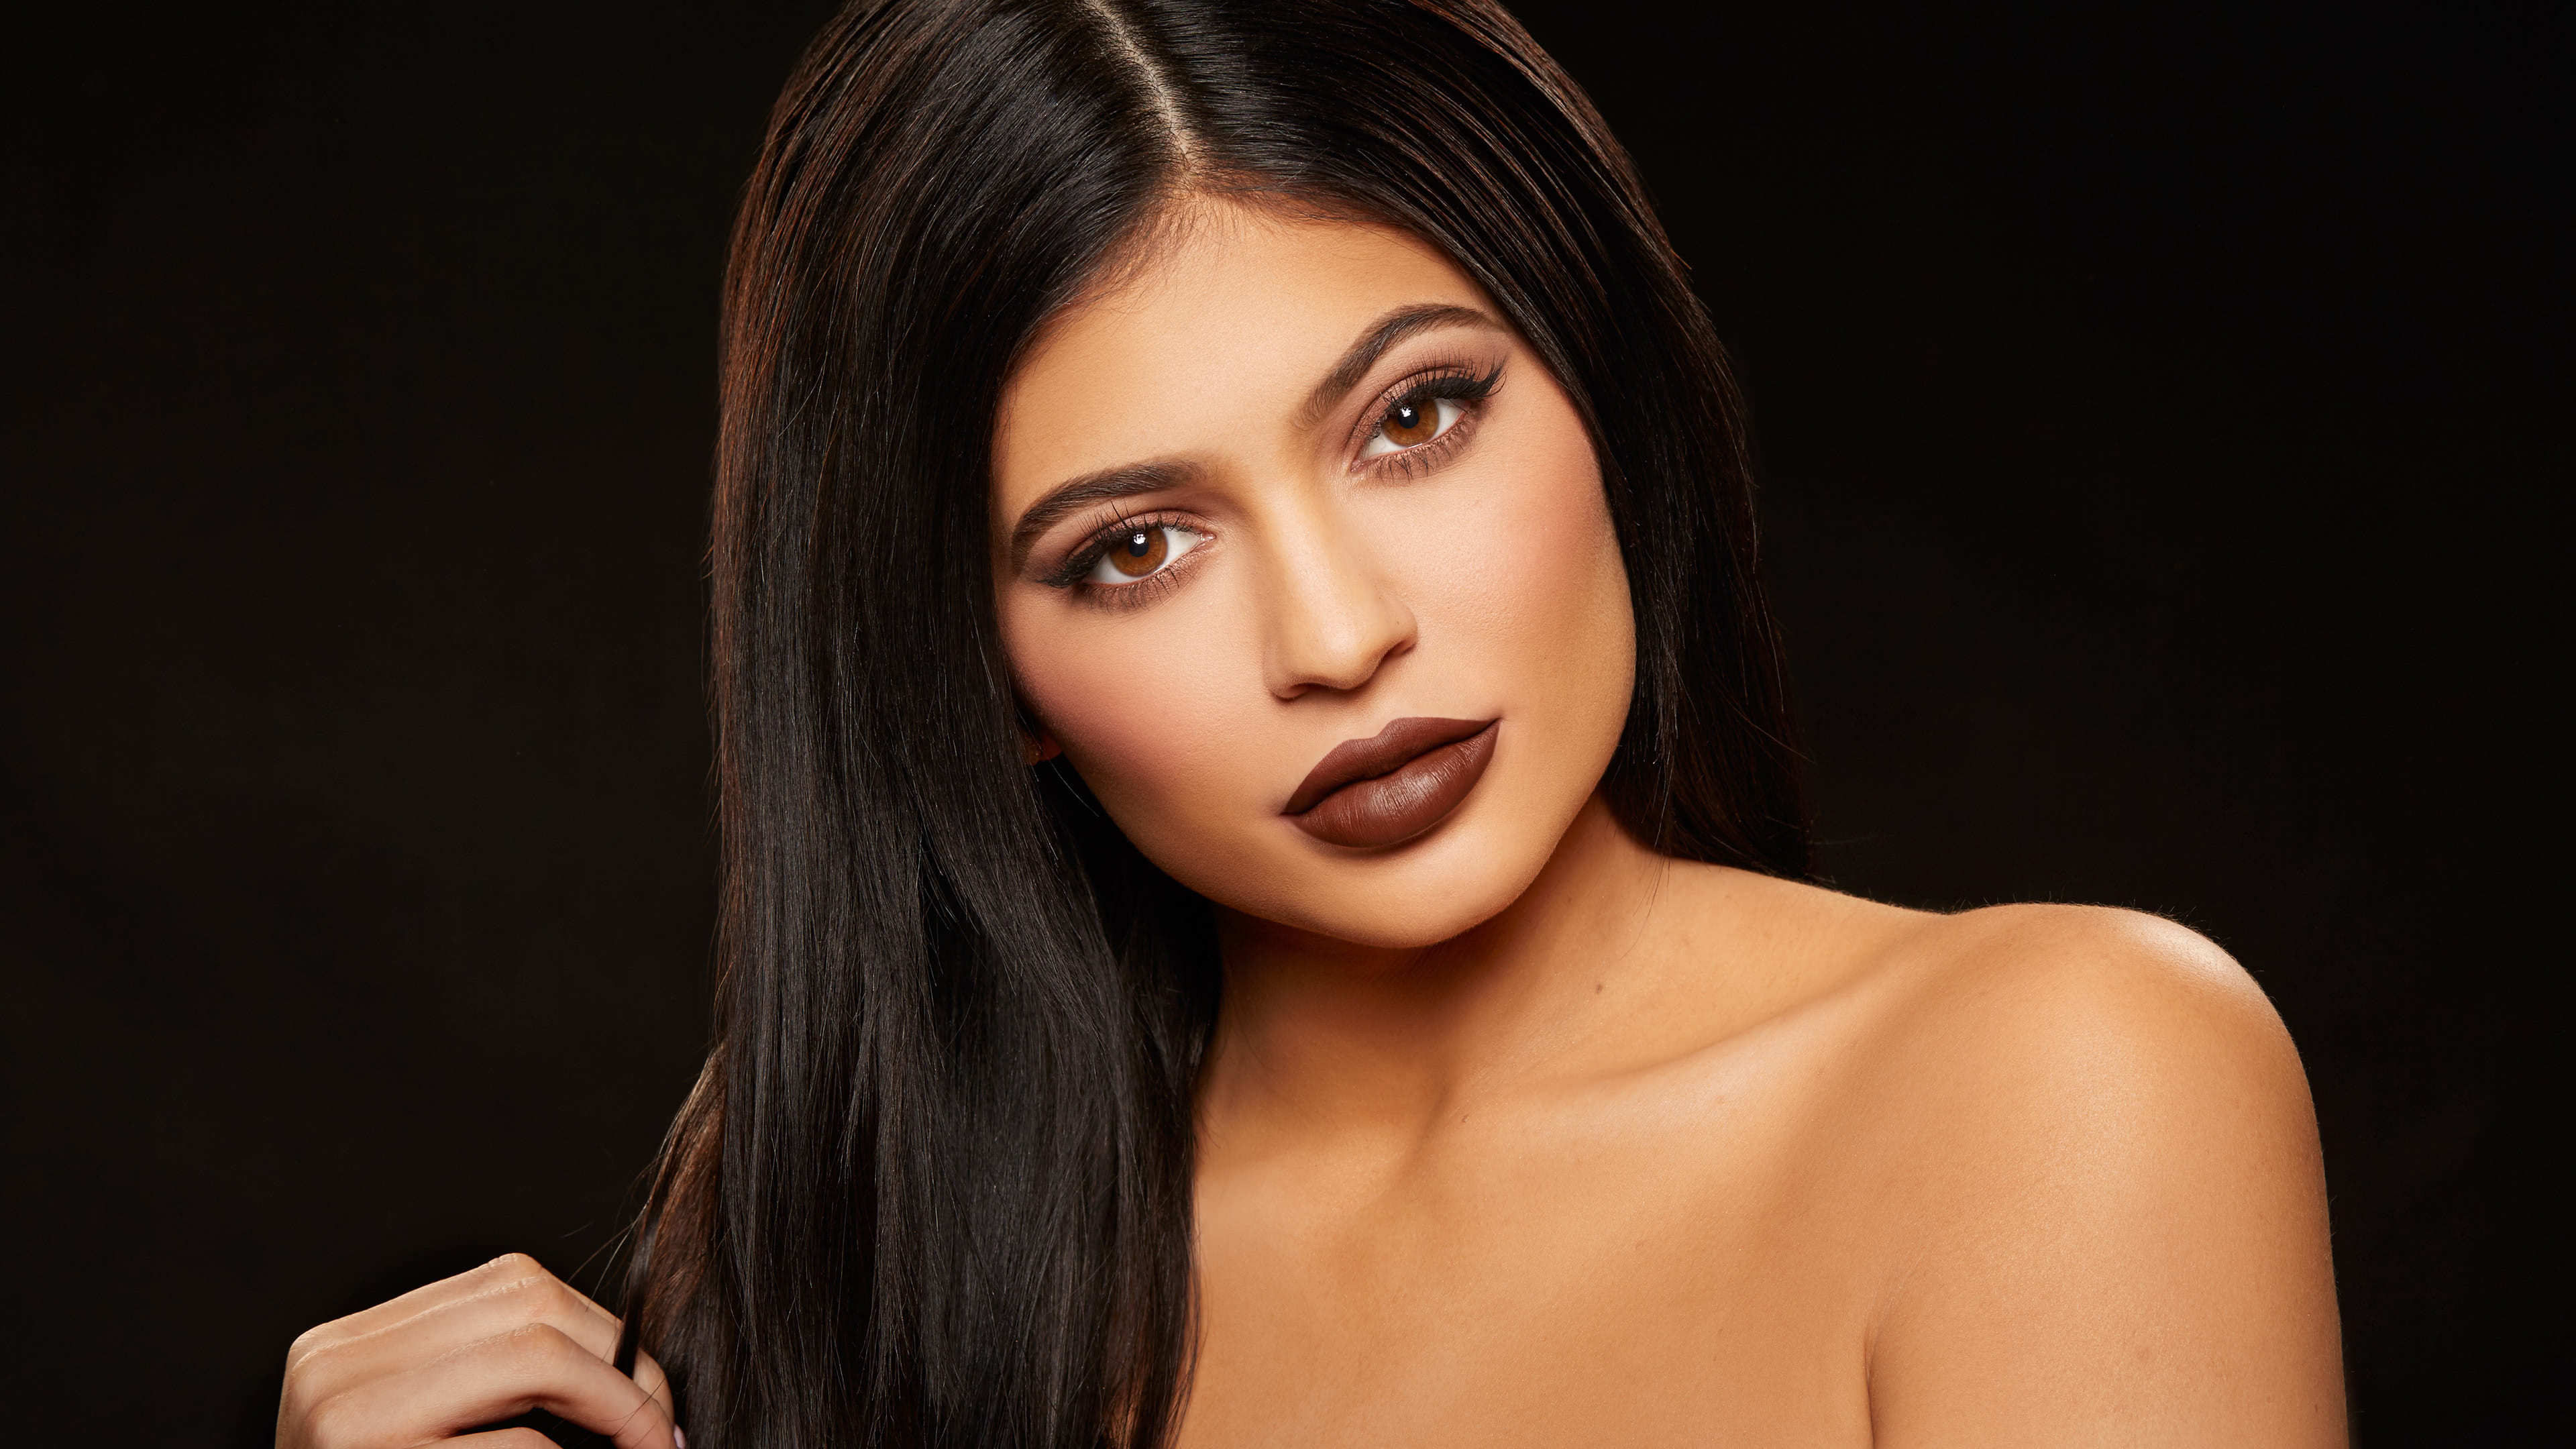 Kylie K Jenner Quay 2017 Wallpapers